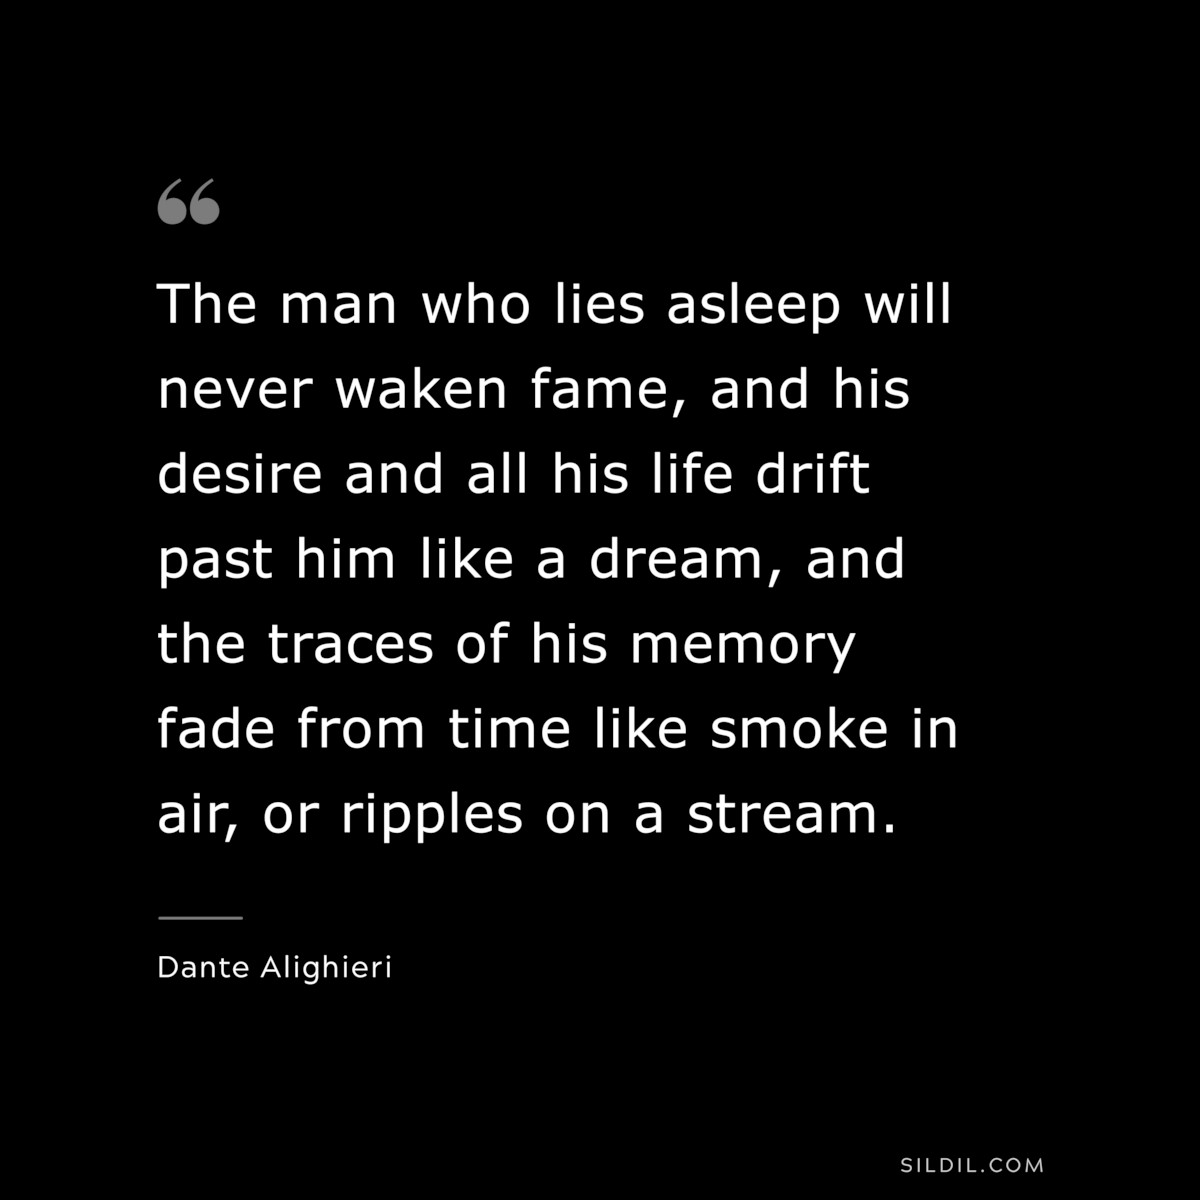 The man who lies asleep will never waken fame, and his desire and all his life drift past him like a dream, and the traces of his memory fade from time like smoke in air, or ripples on a stream. ― Dante Alighieri